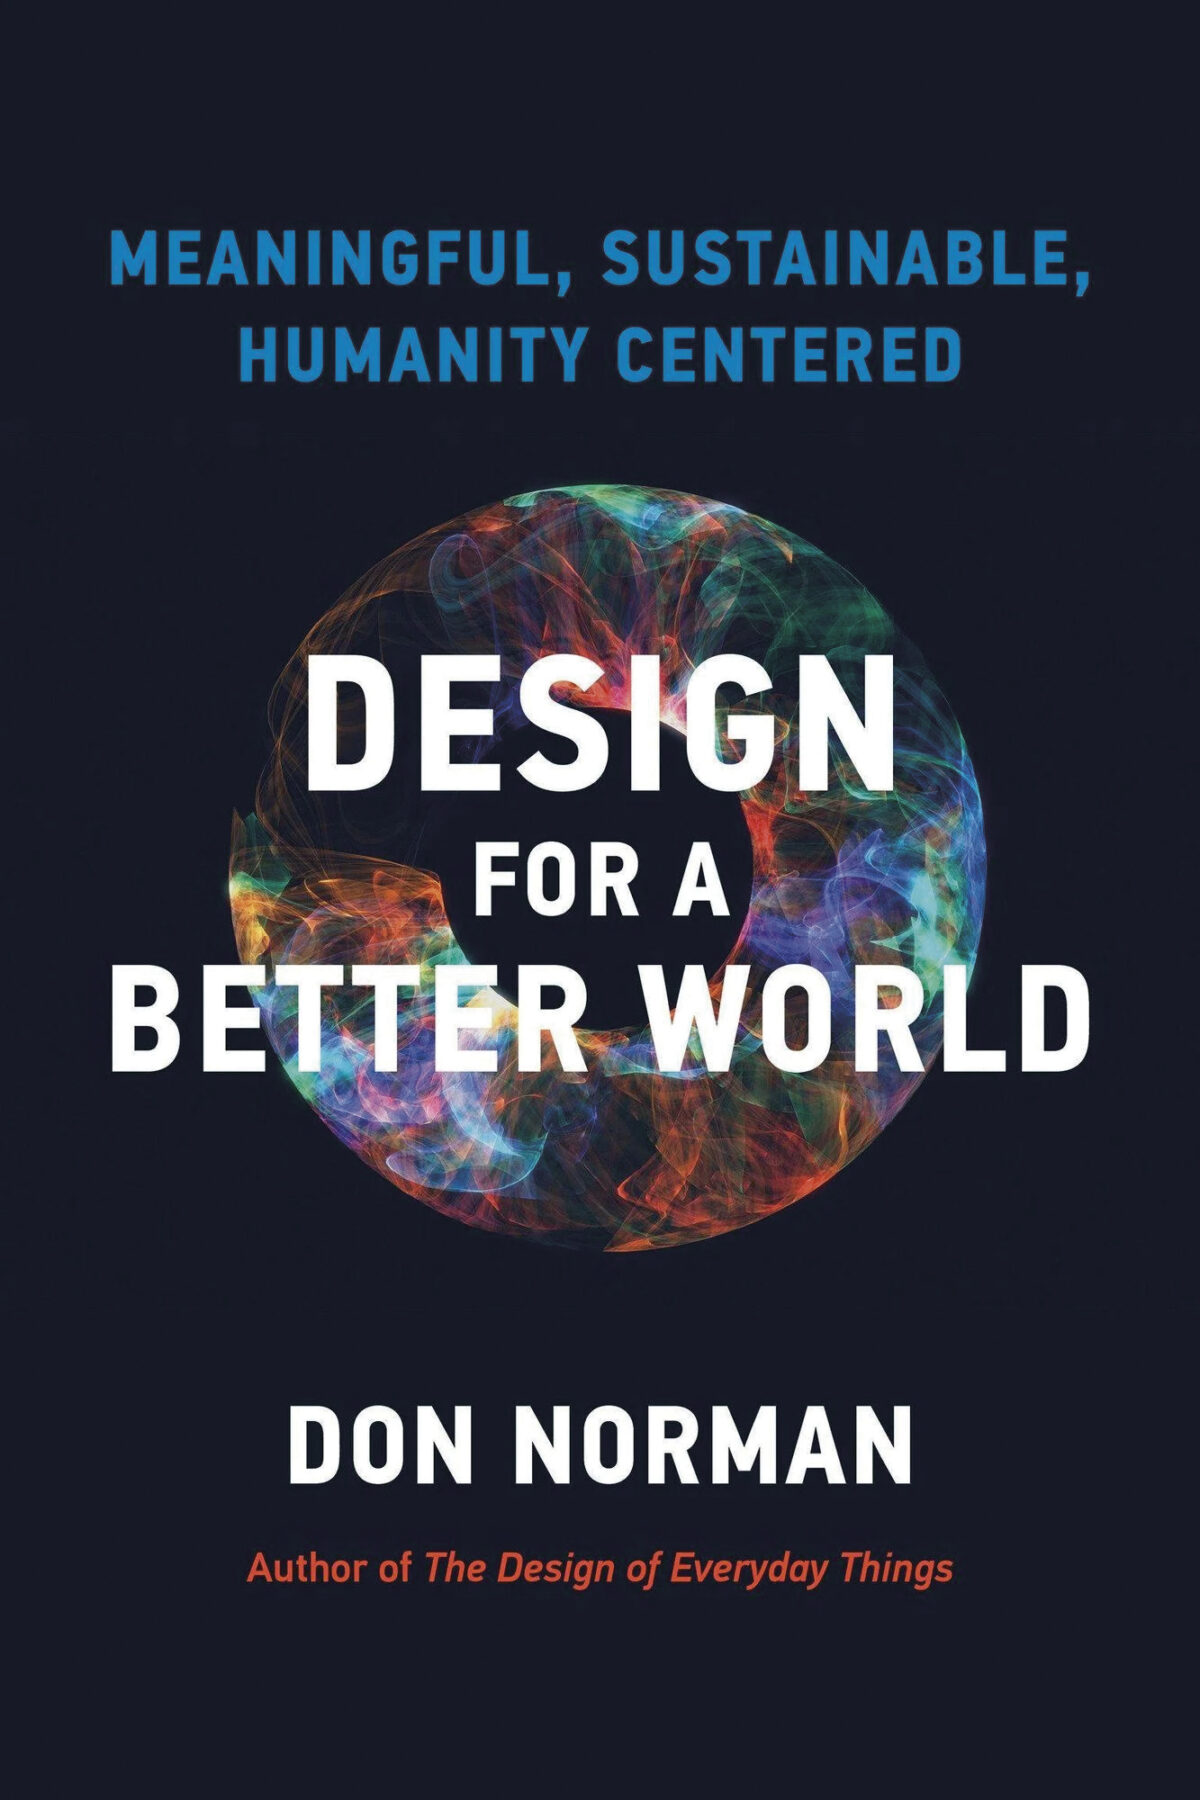 "Design for a Better World" by Don Norman